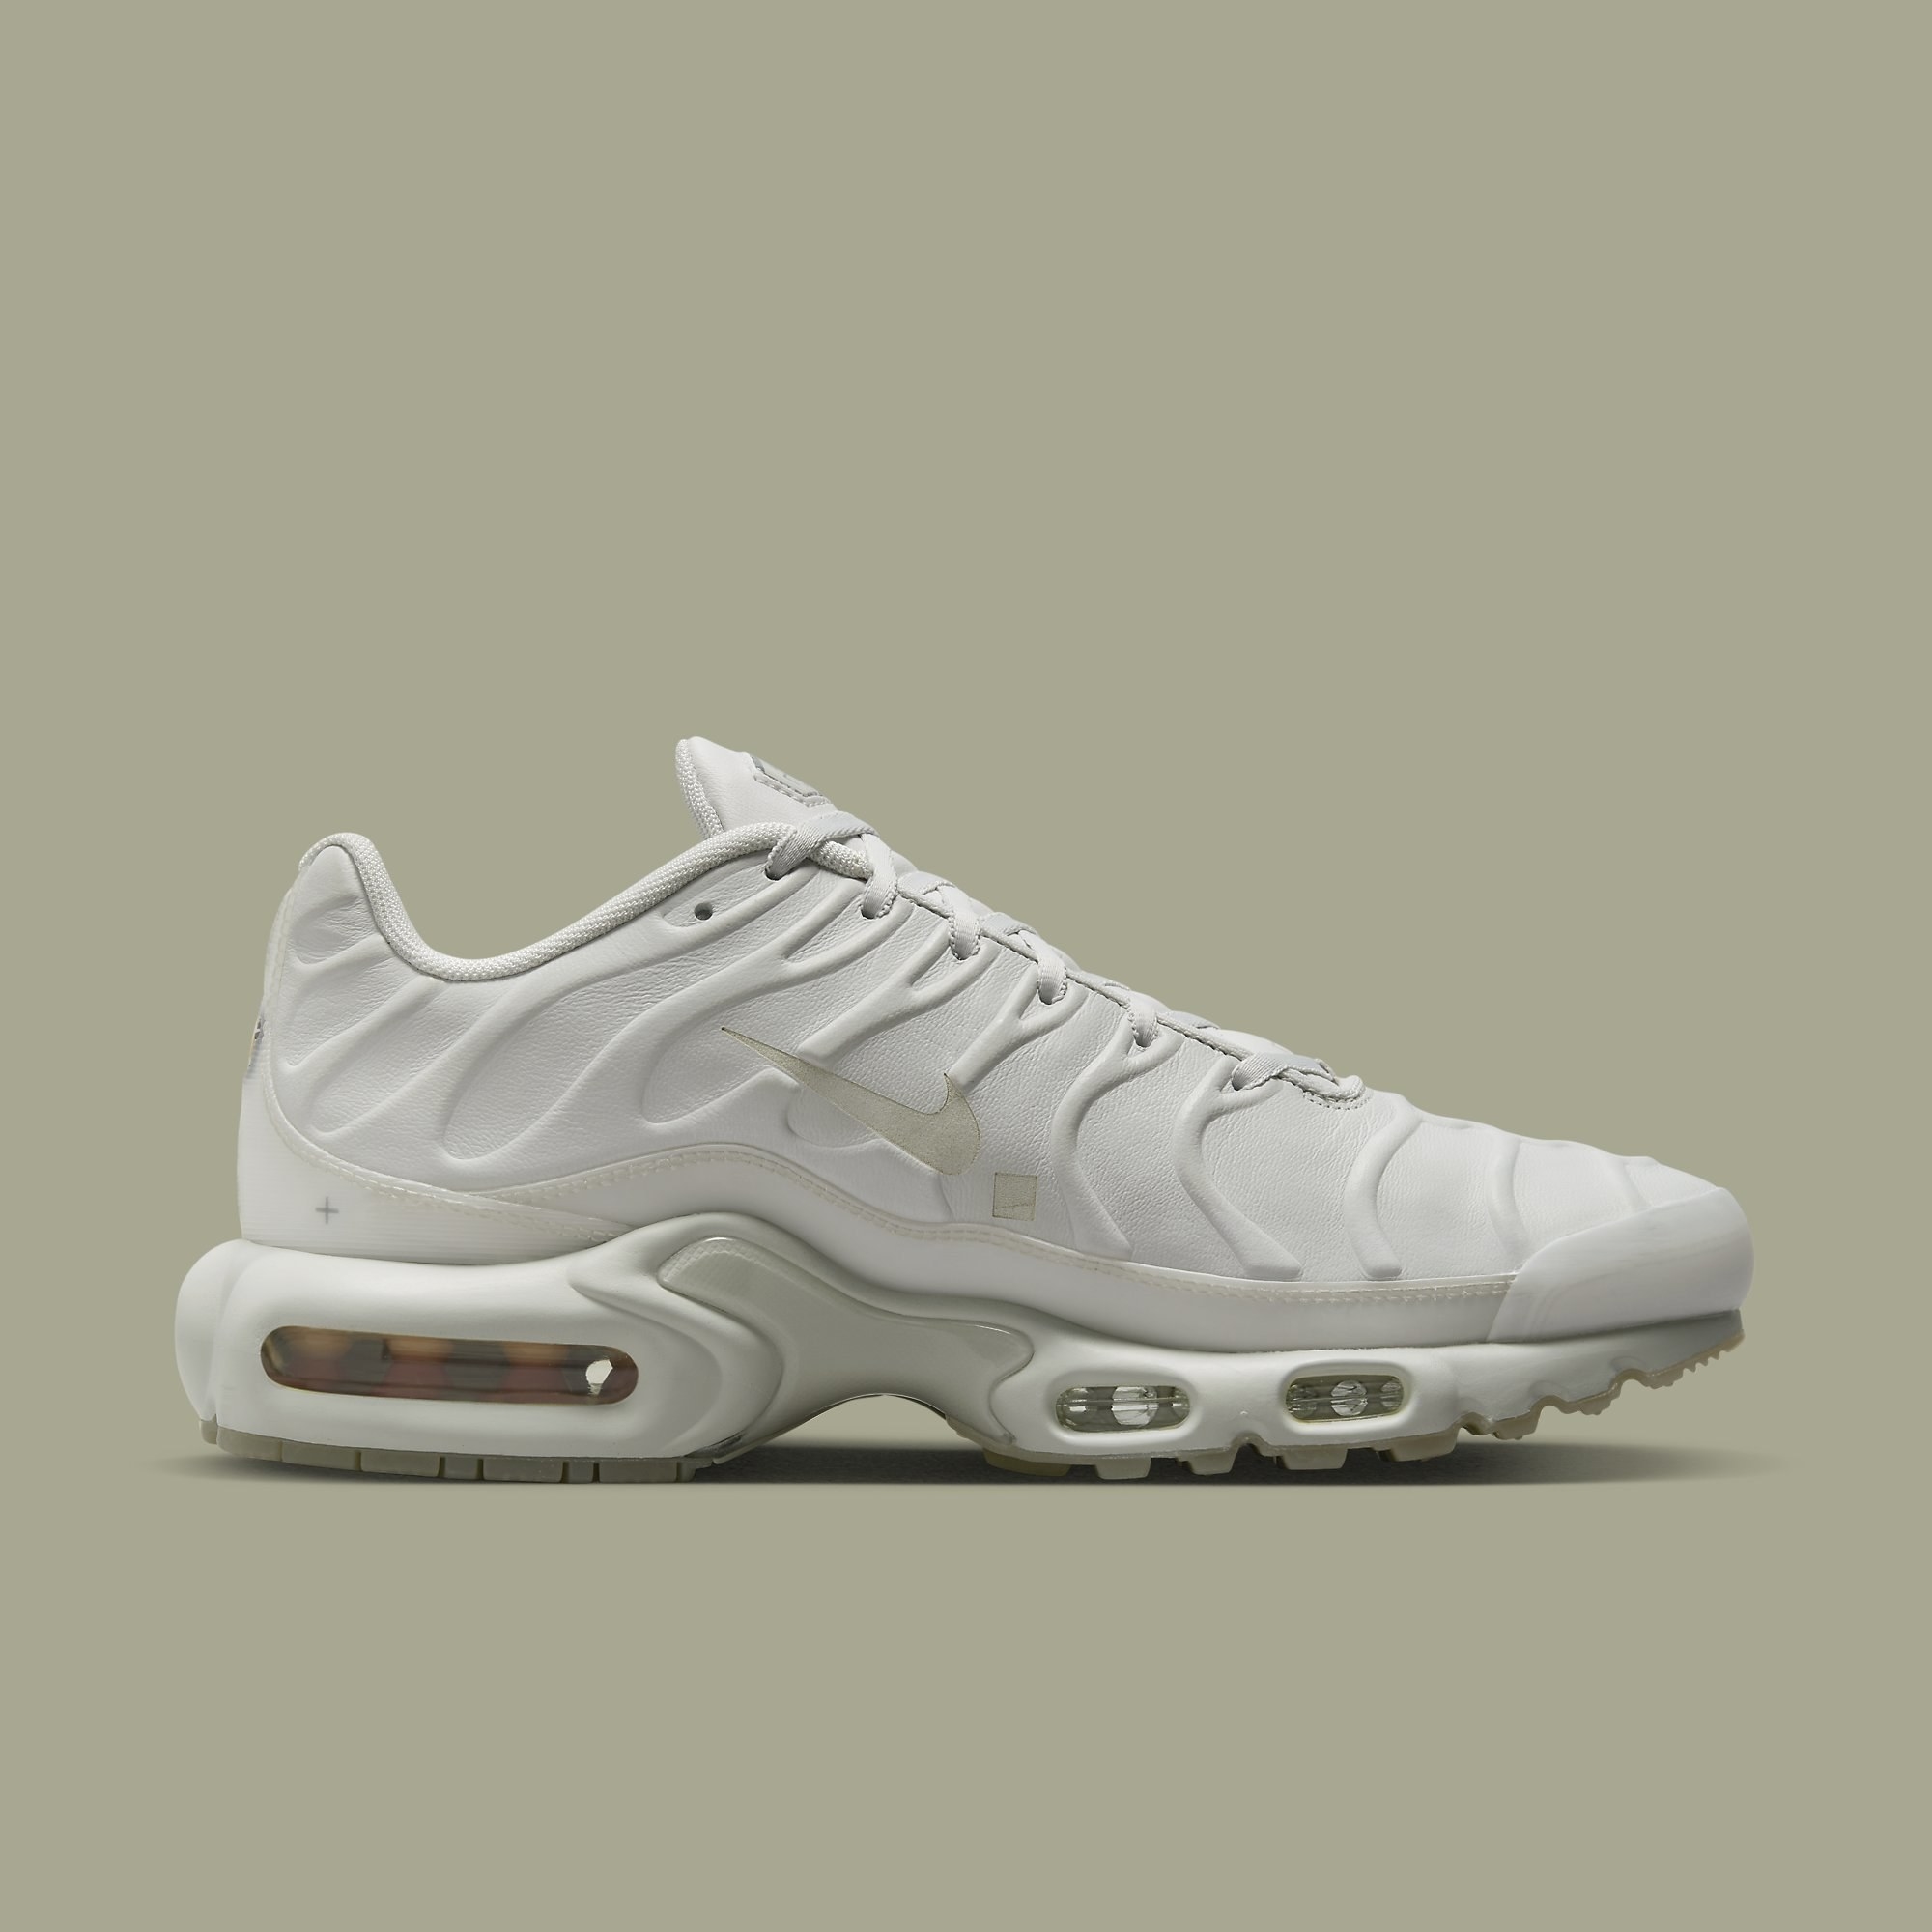 A-Cold-Wall x Nike Air Max Plus Collab Release Date 2023 | Complex